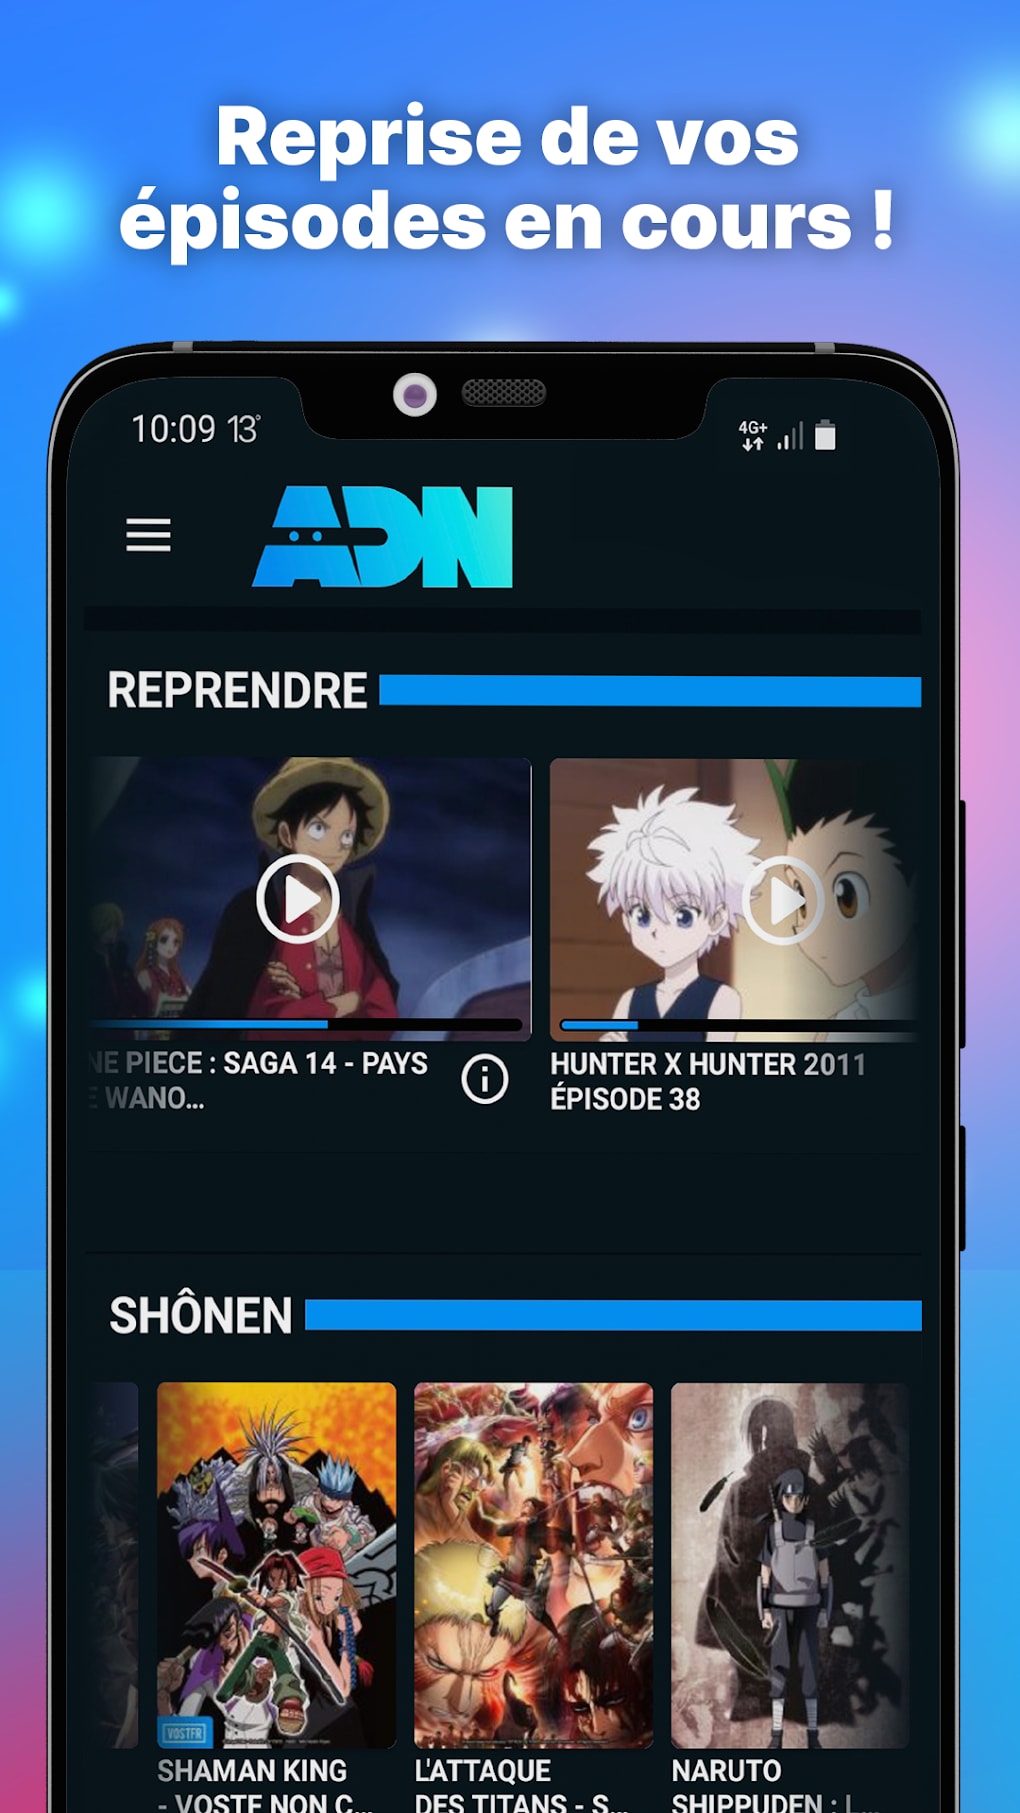 Download ADN  Anime Digital Network on PC with MEmu